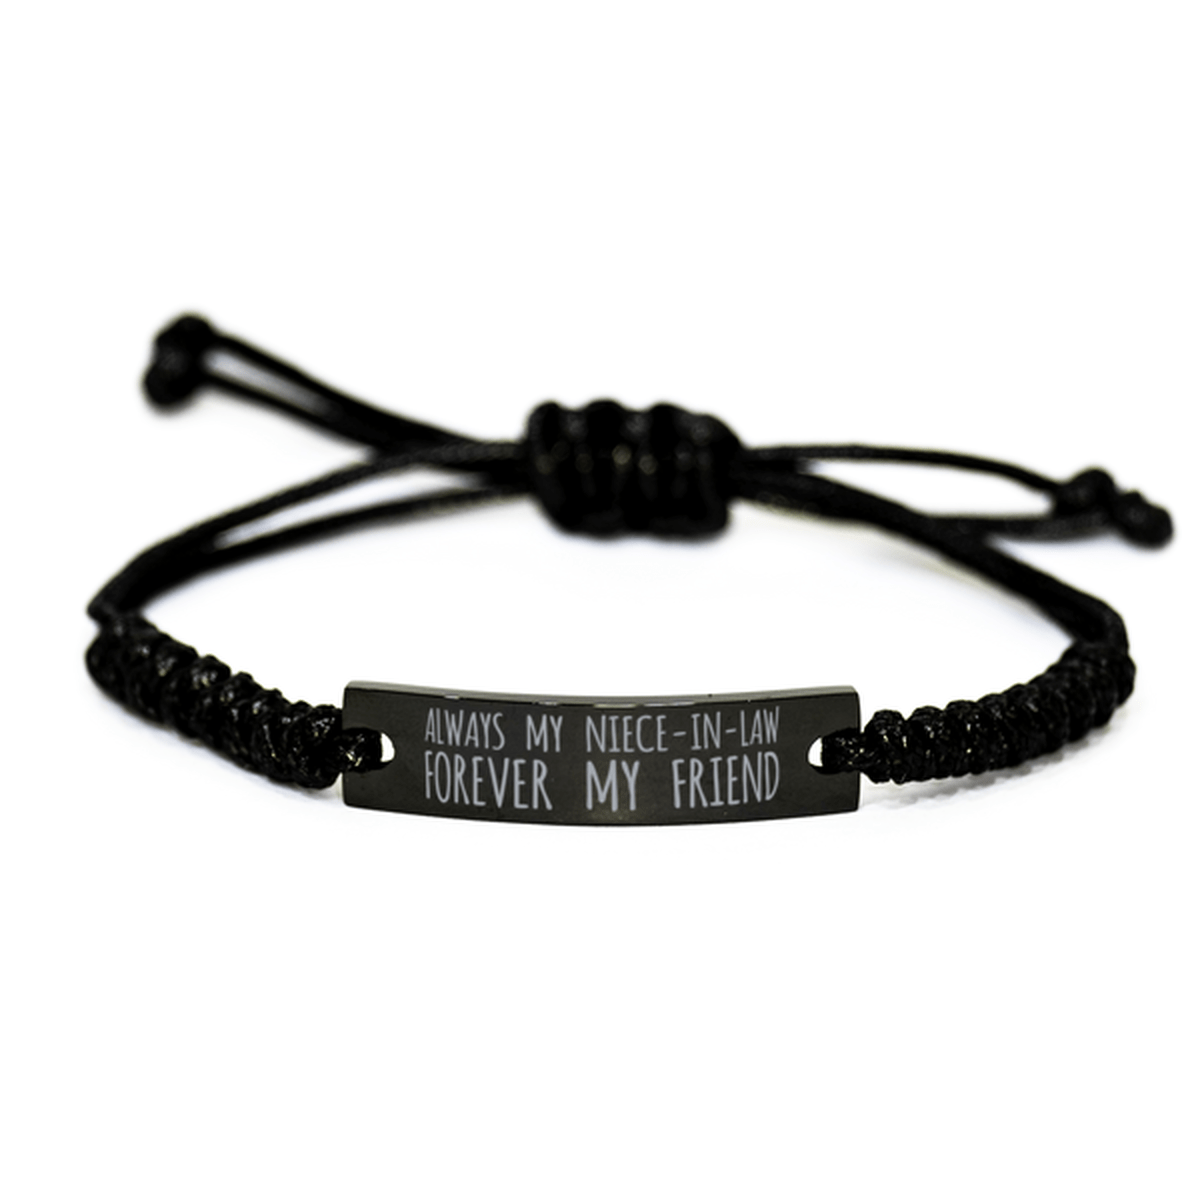 Inspirational Niece-In-Law Black Rope Bracelet, Always My Niece-In-Law Forever My Friend, Best Birthday Gifts For Family